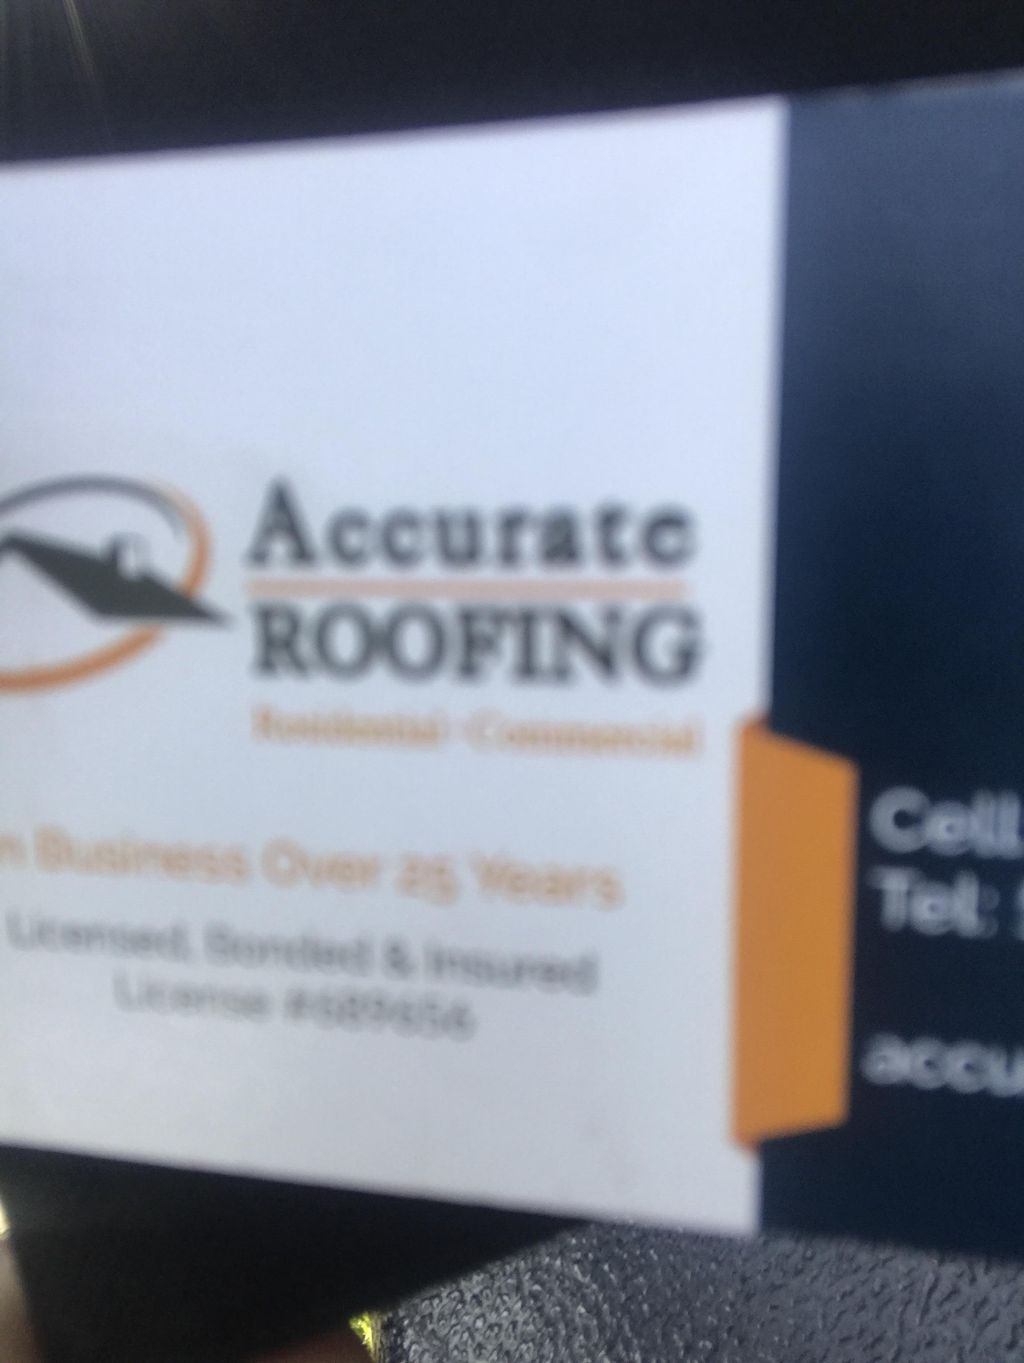 Accurate roofing